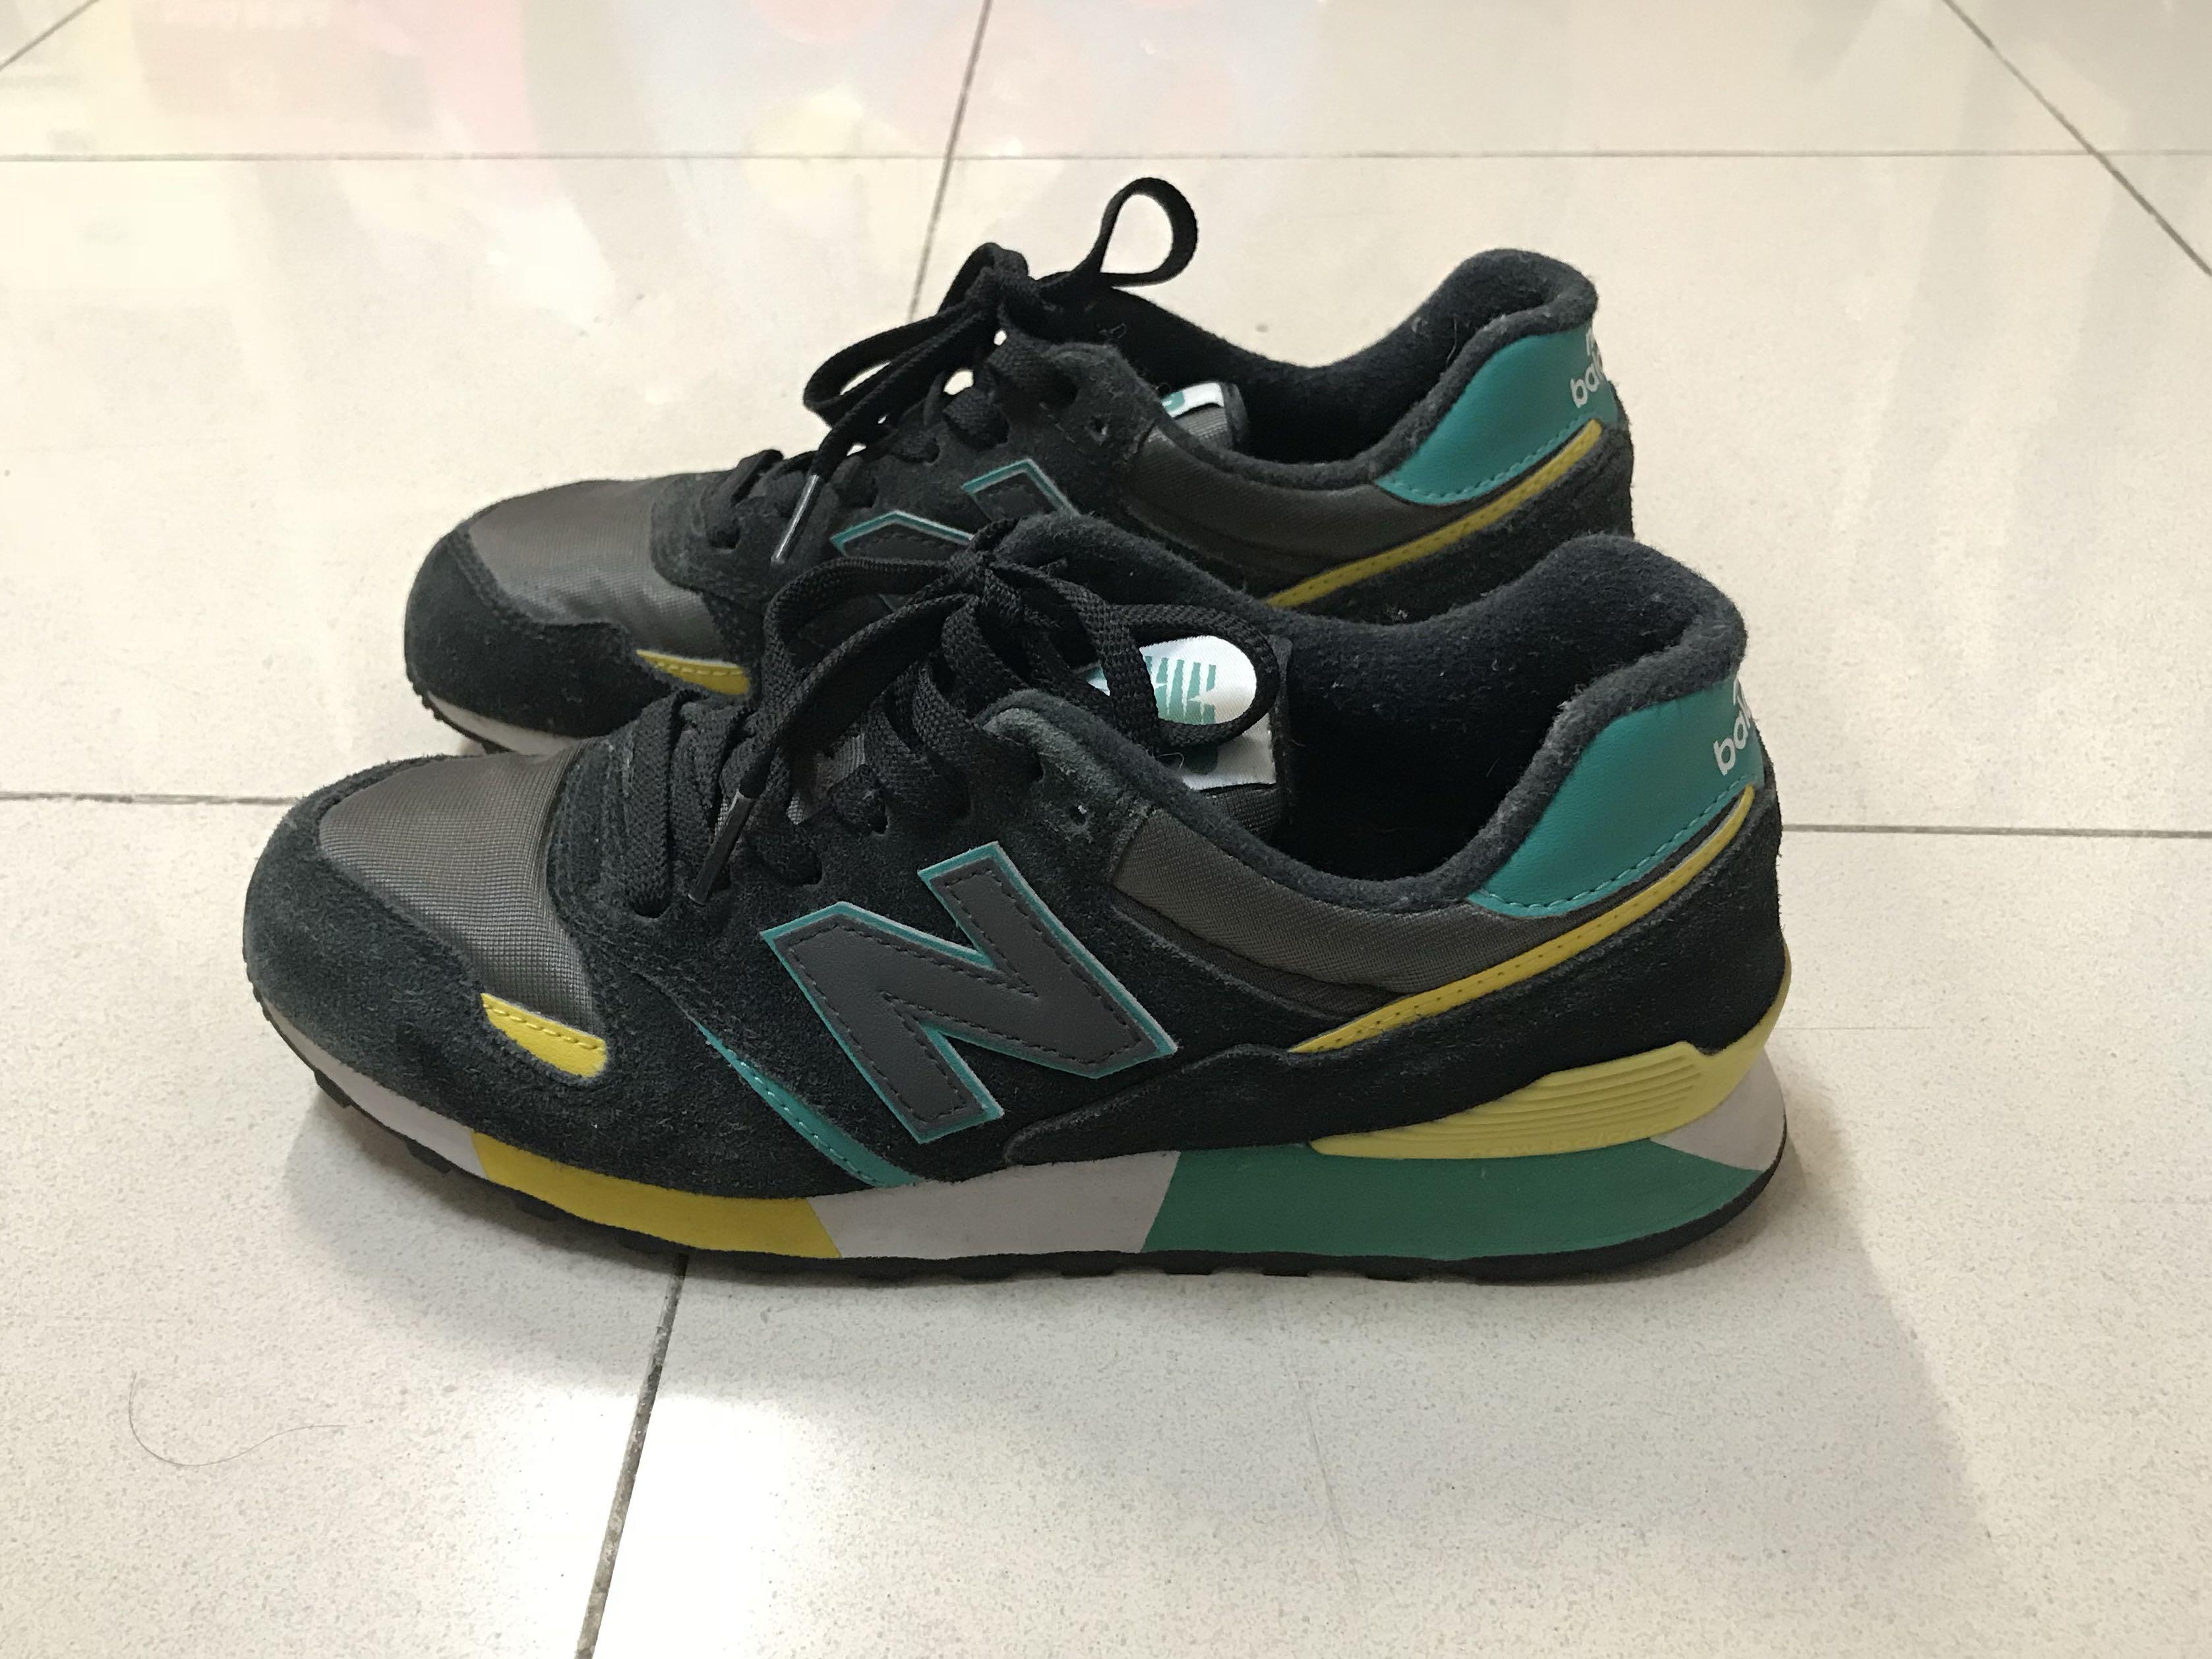 new balance 690 homme discount